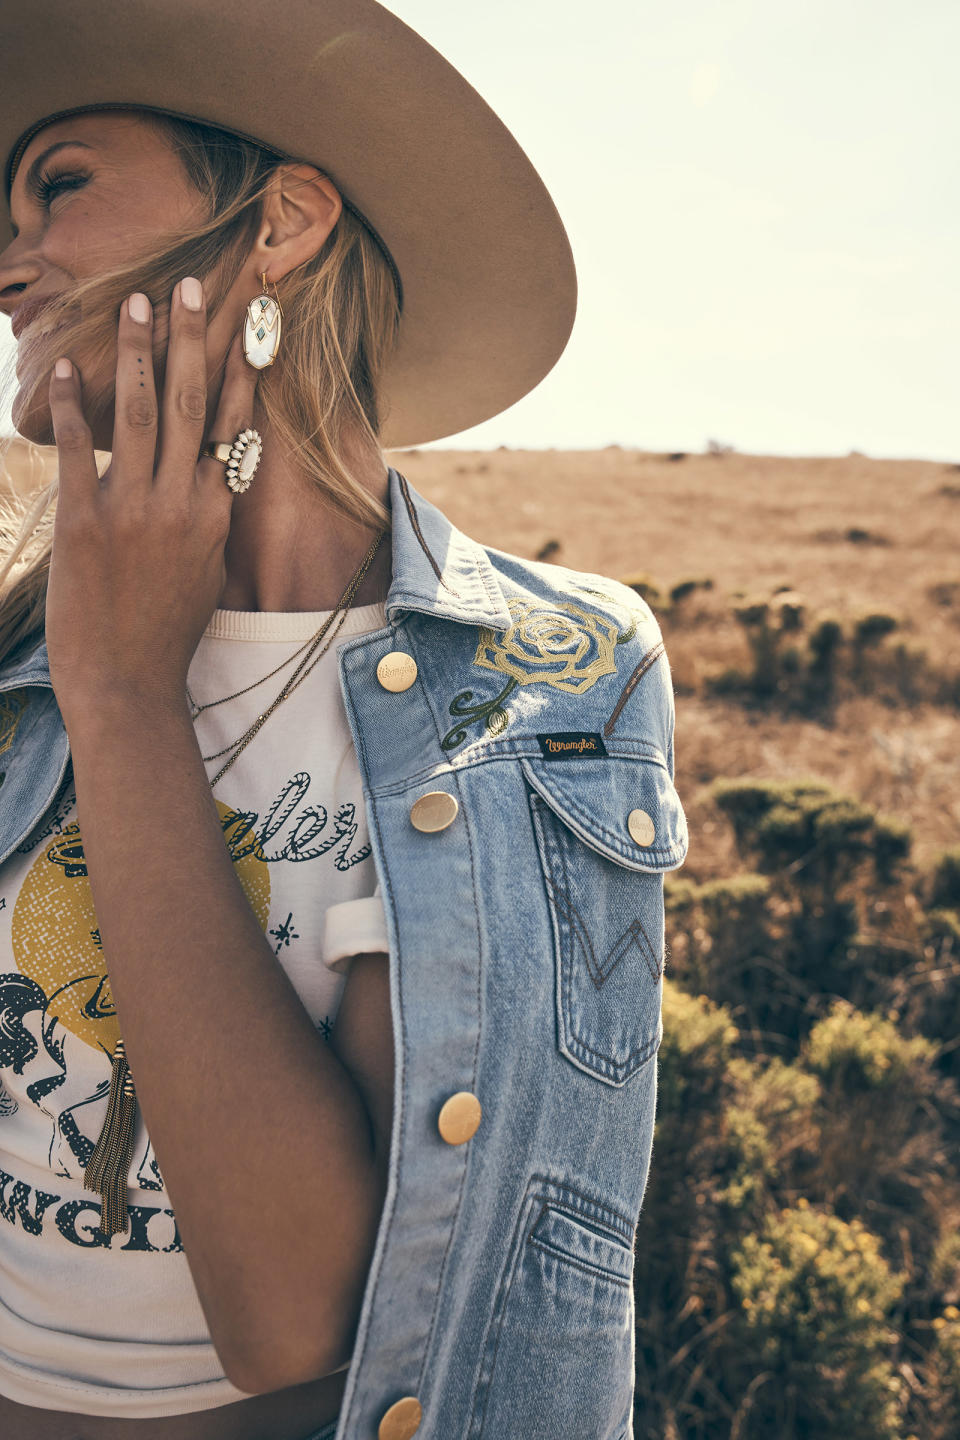 Wrangler x Yellow Rose by Kendra Scott collection.